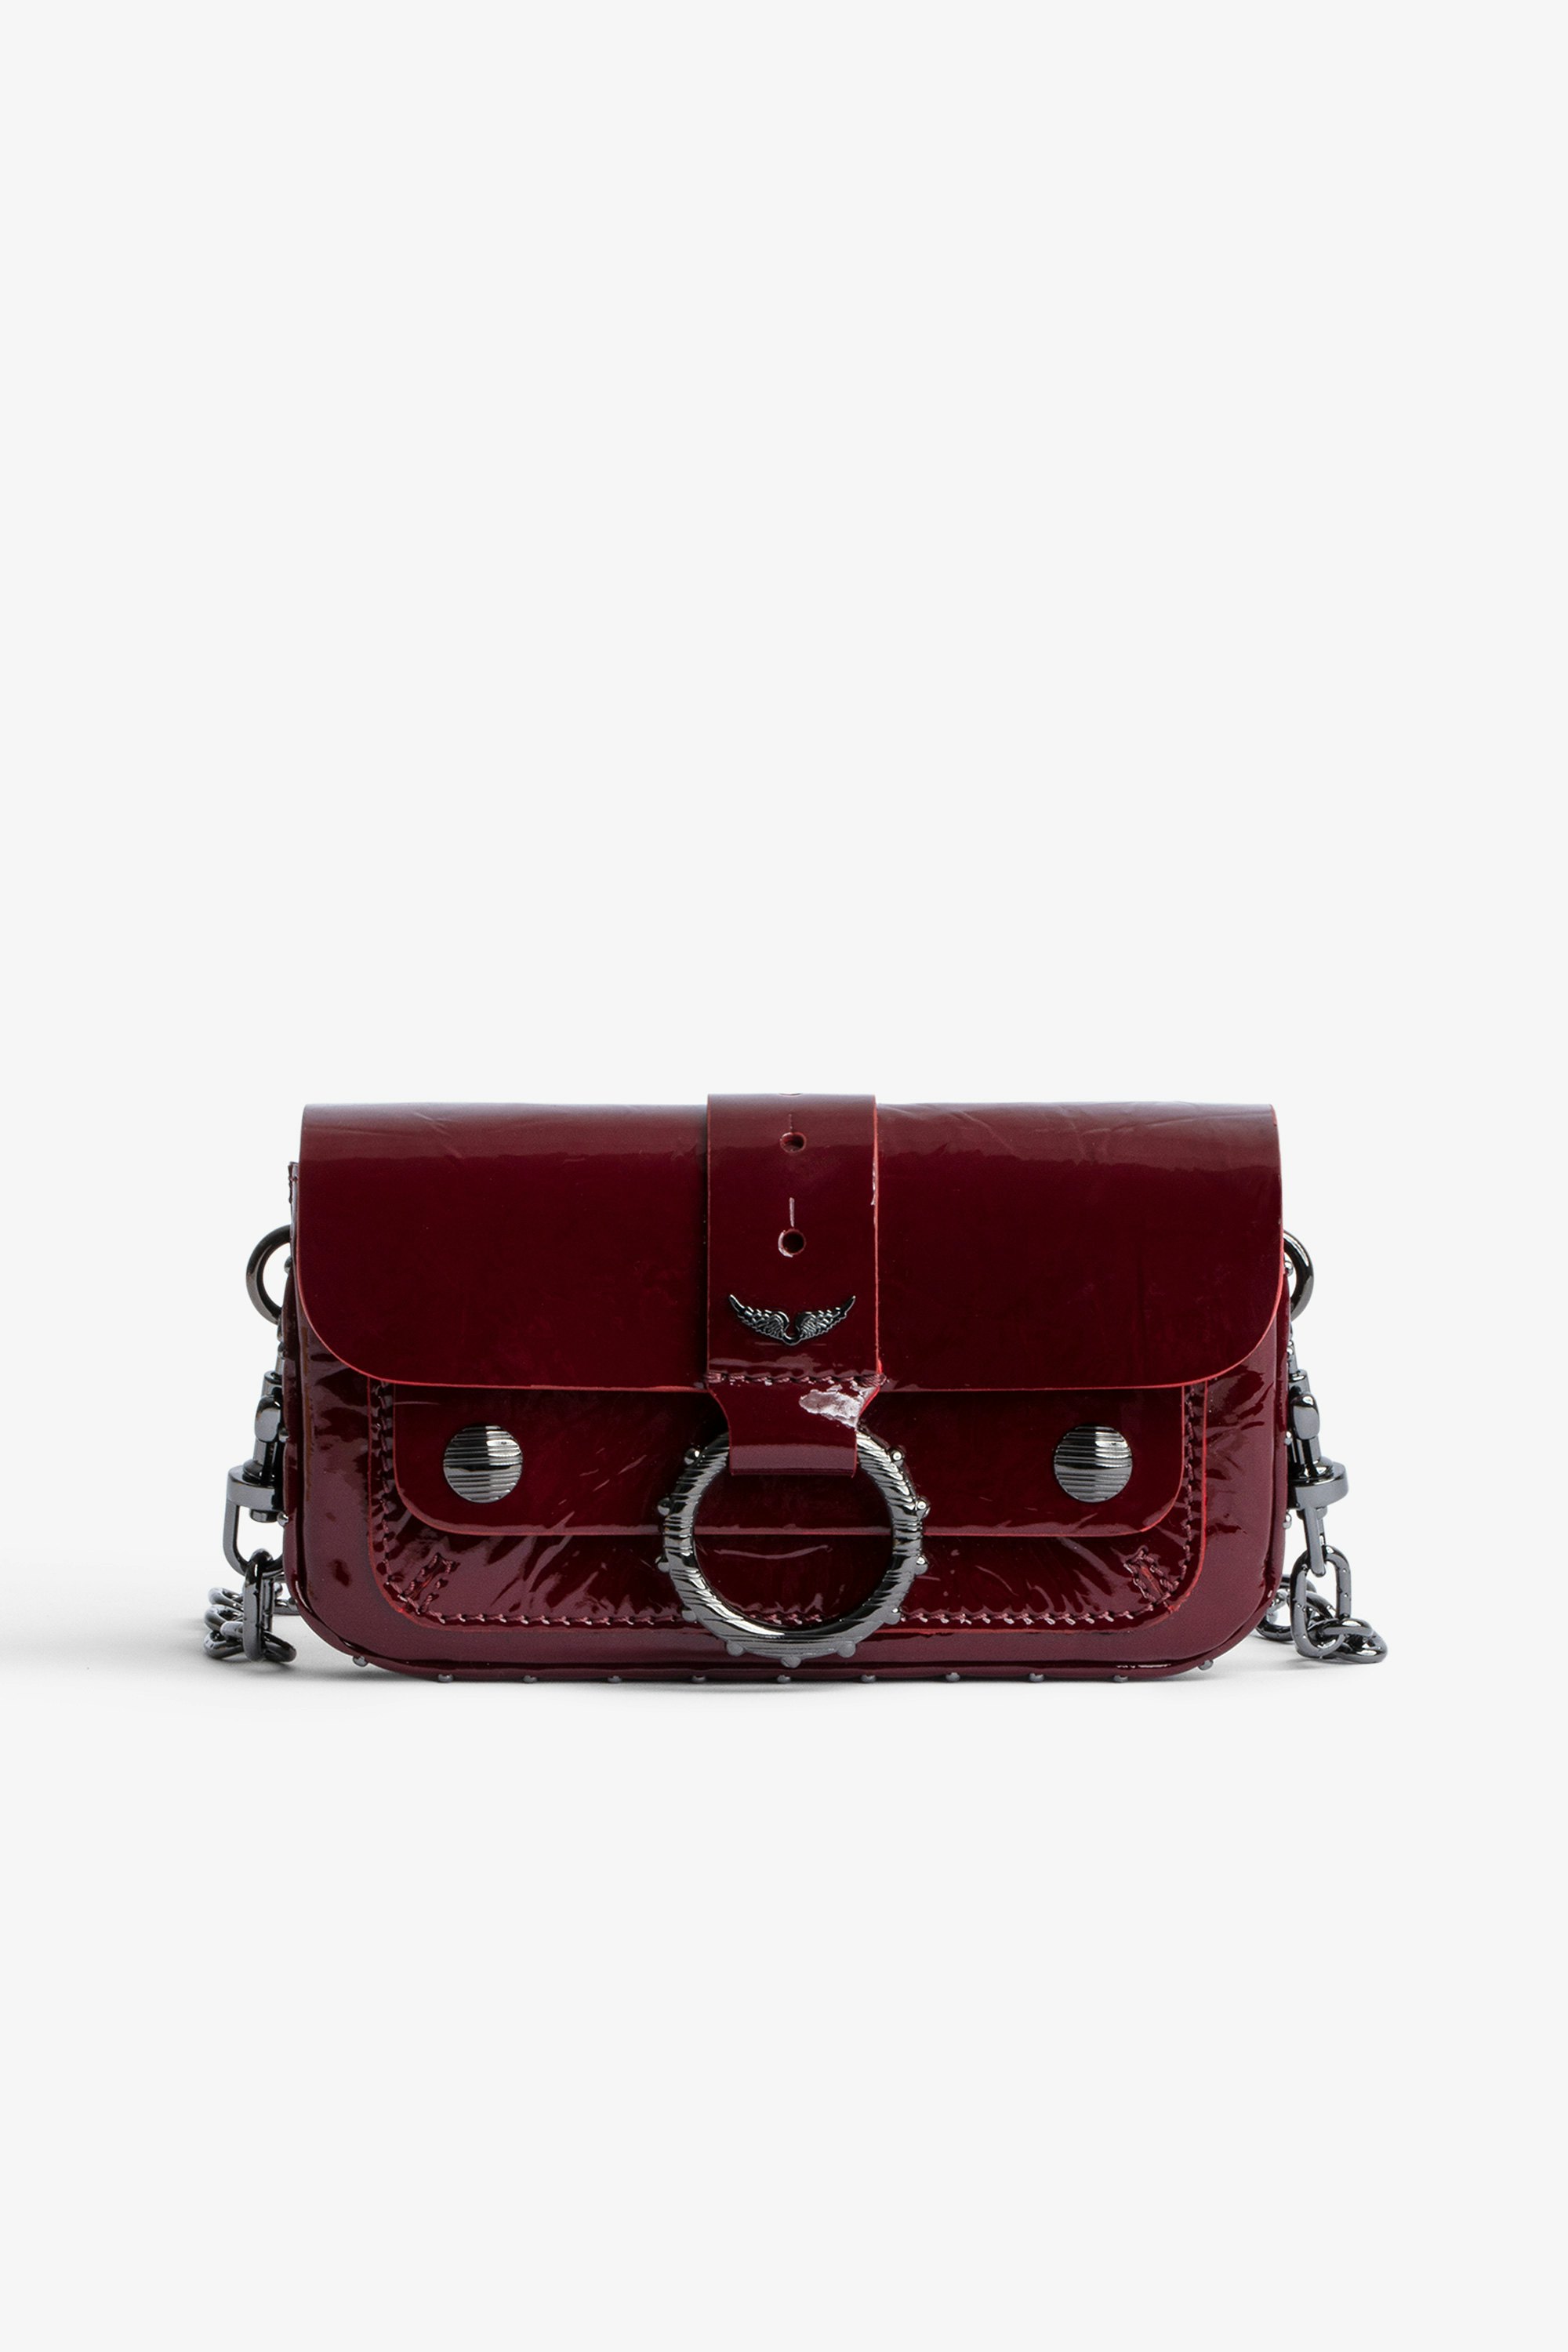 Kate 財布 Wrinkle バッグ Burgundy patent leather bag with shoulder strap and flap